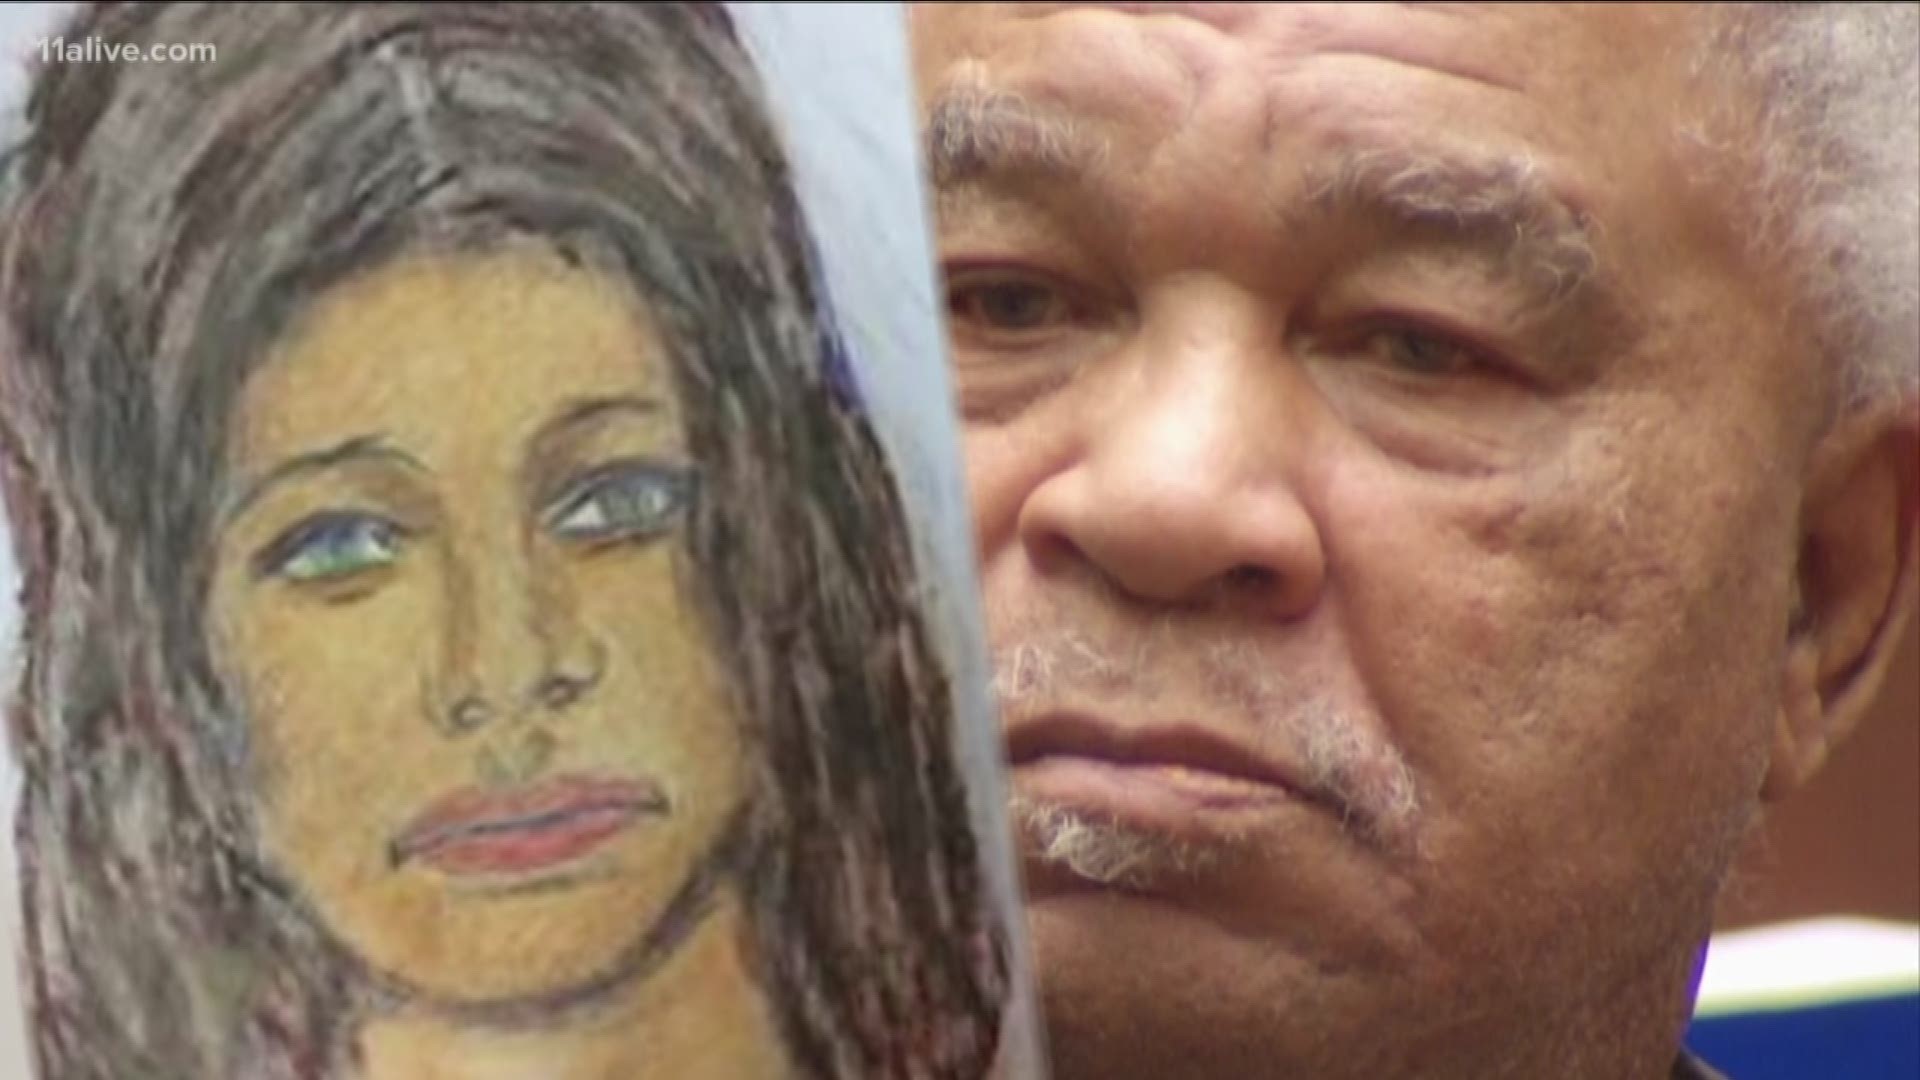 Police in Maryland have released a sketch made by Samuel Little, who claims to have murdered at least 90 women since the 1980s.